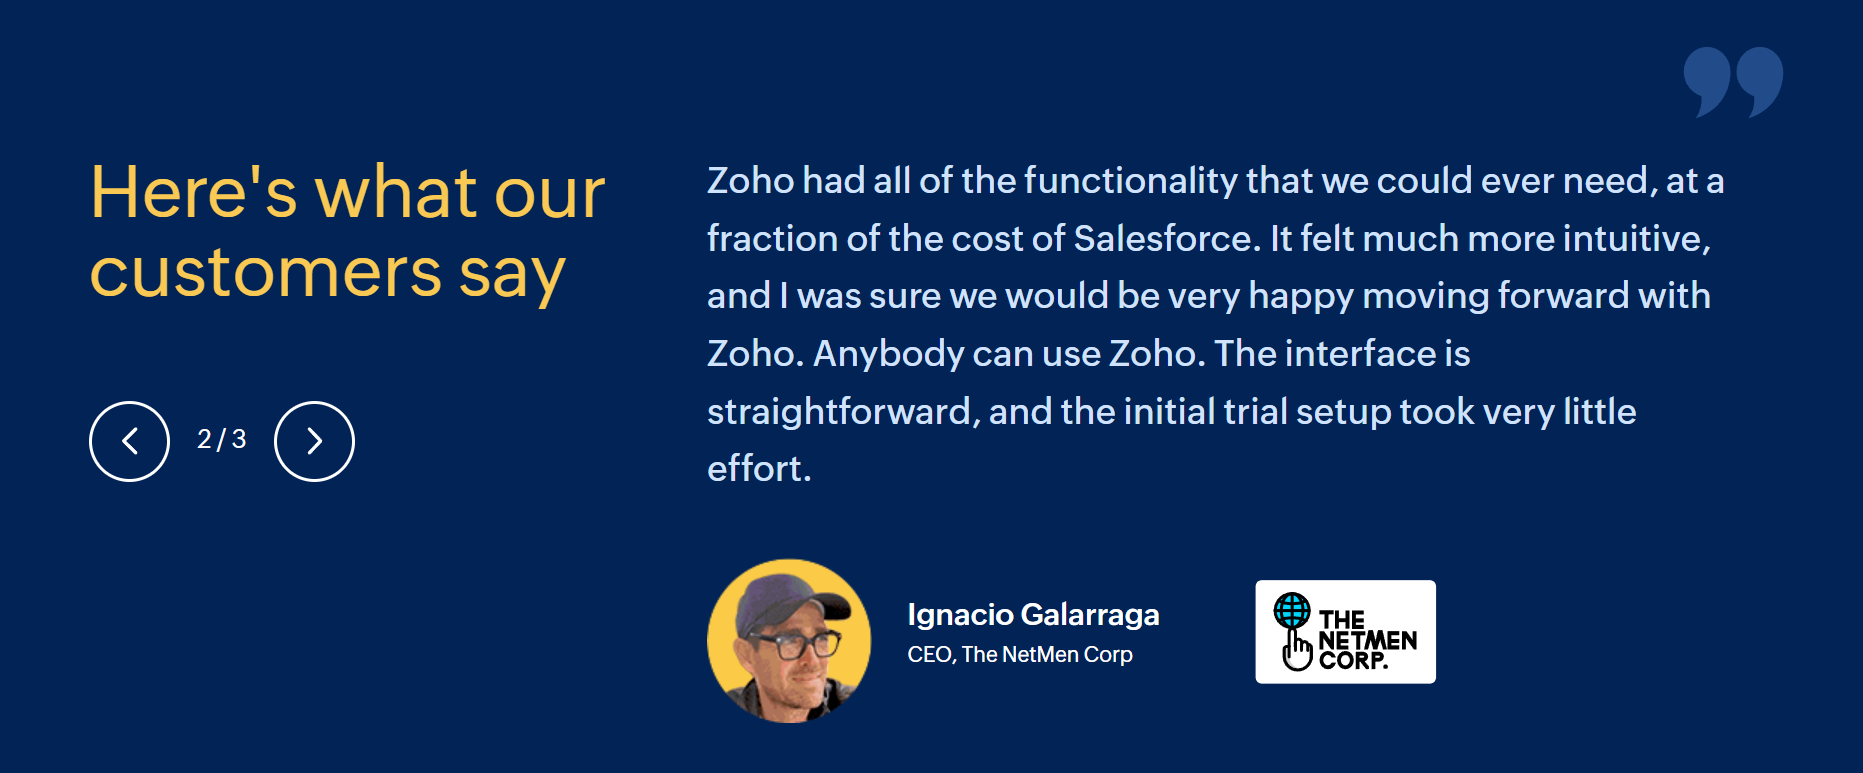 A CEO provides social proof that Zoho is a better product "at a fraction of the cost of Salesforce."